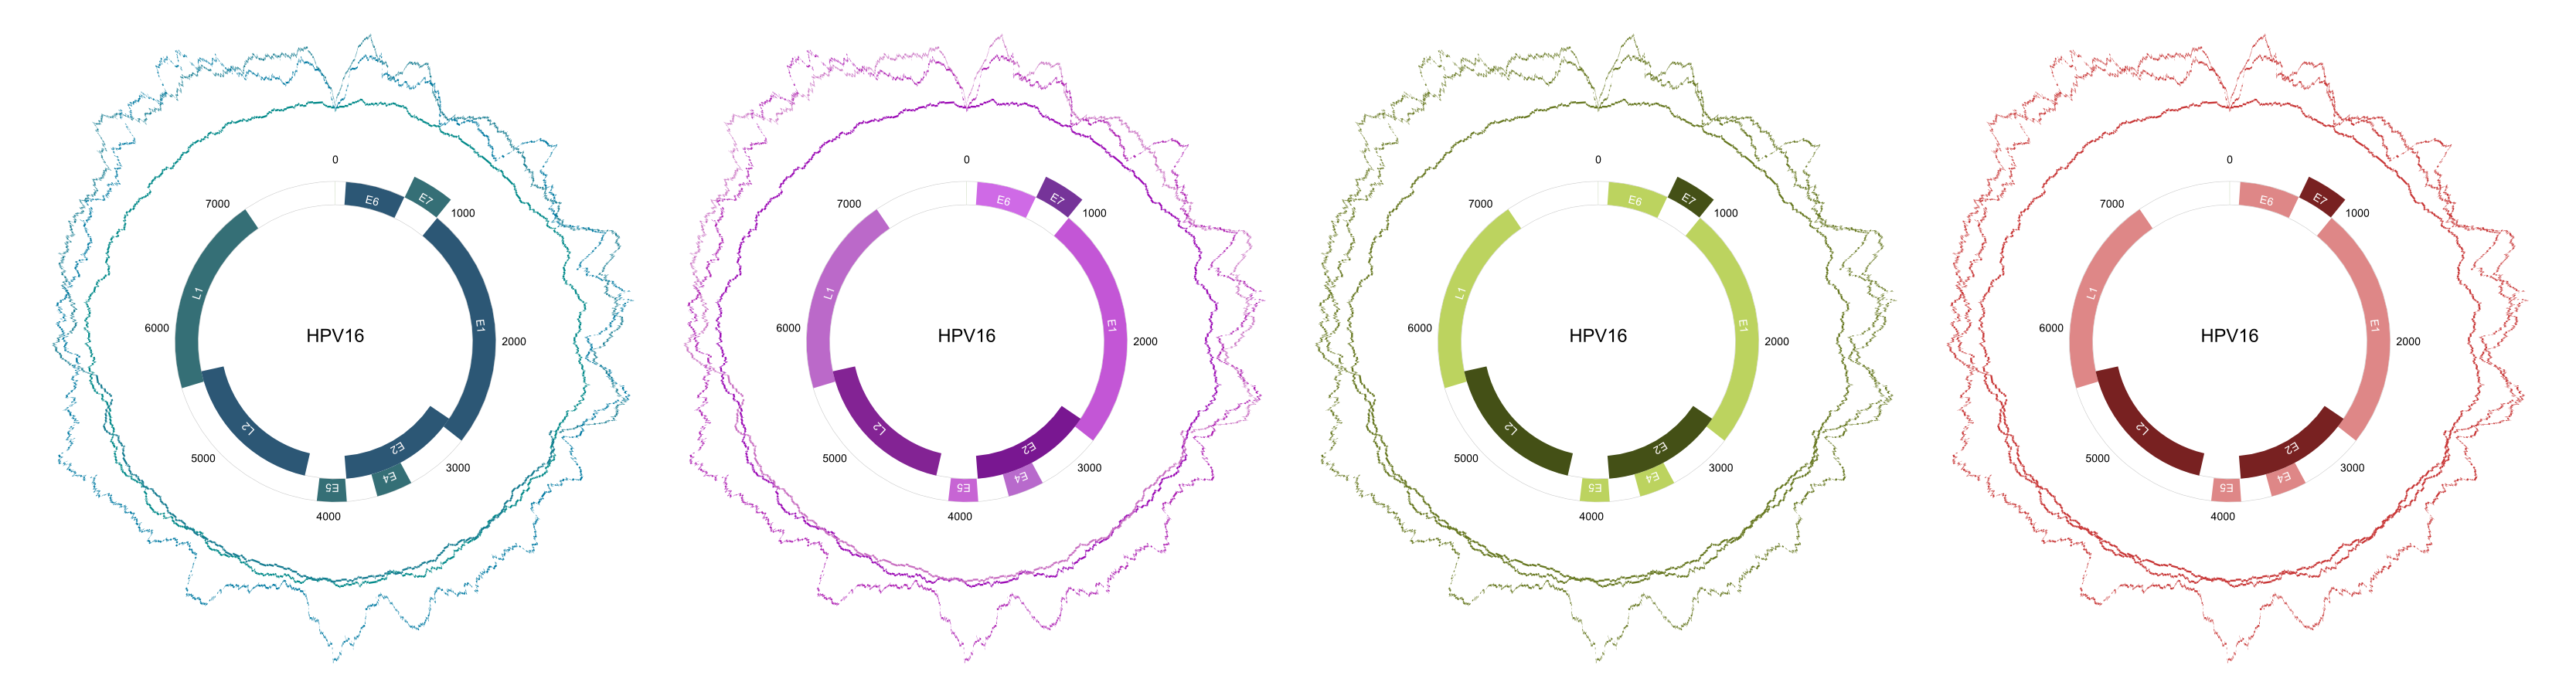 HPV16 Coverage Plots